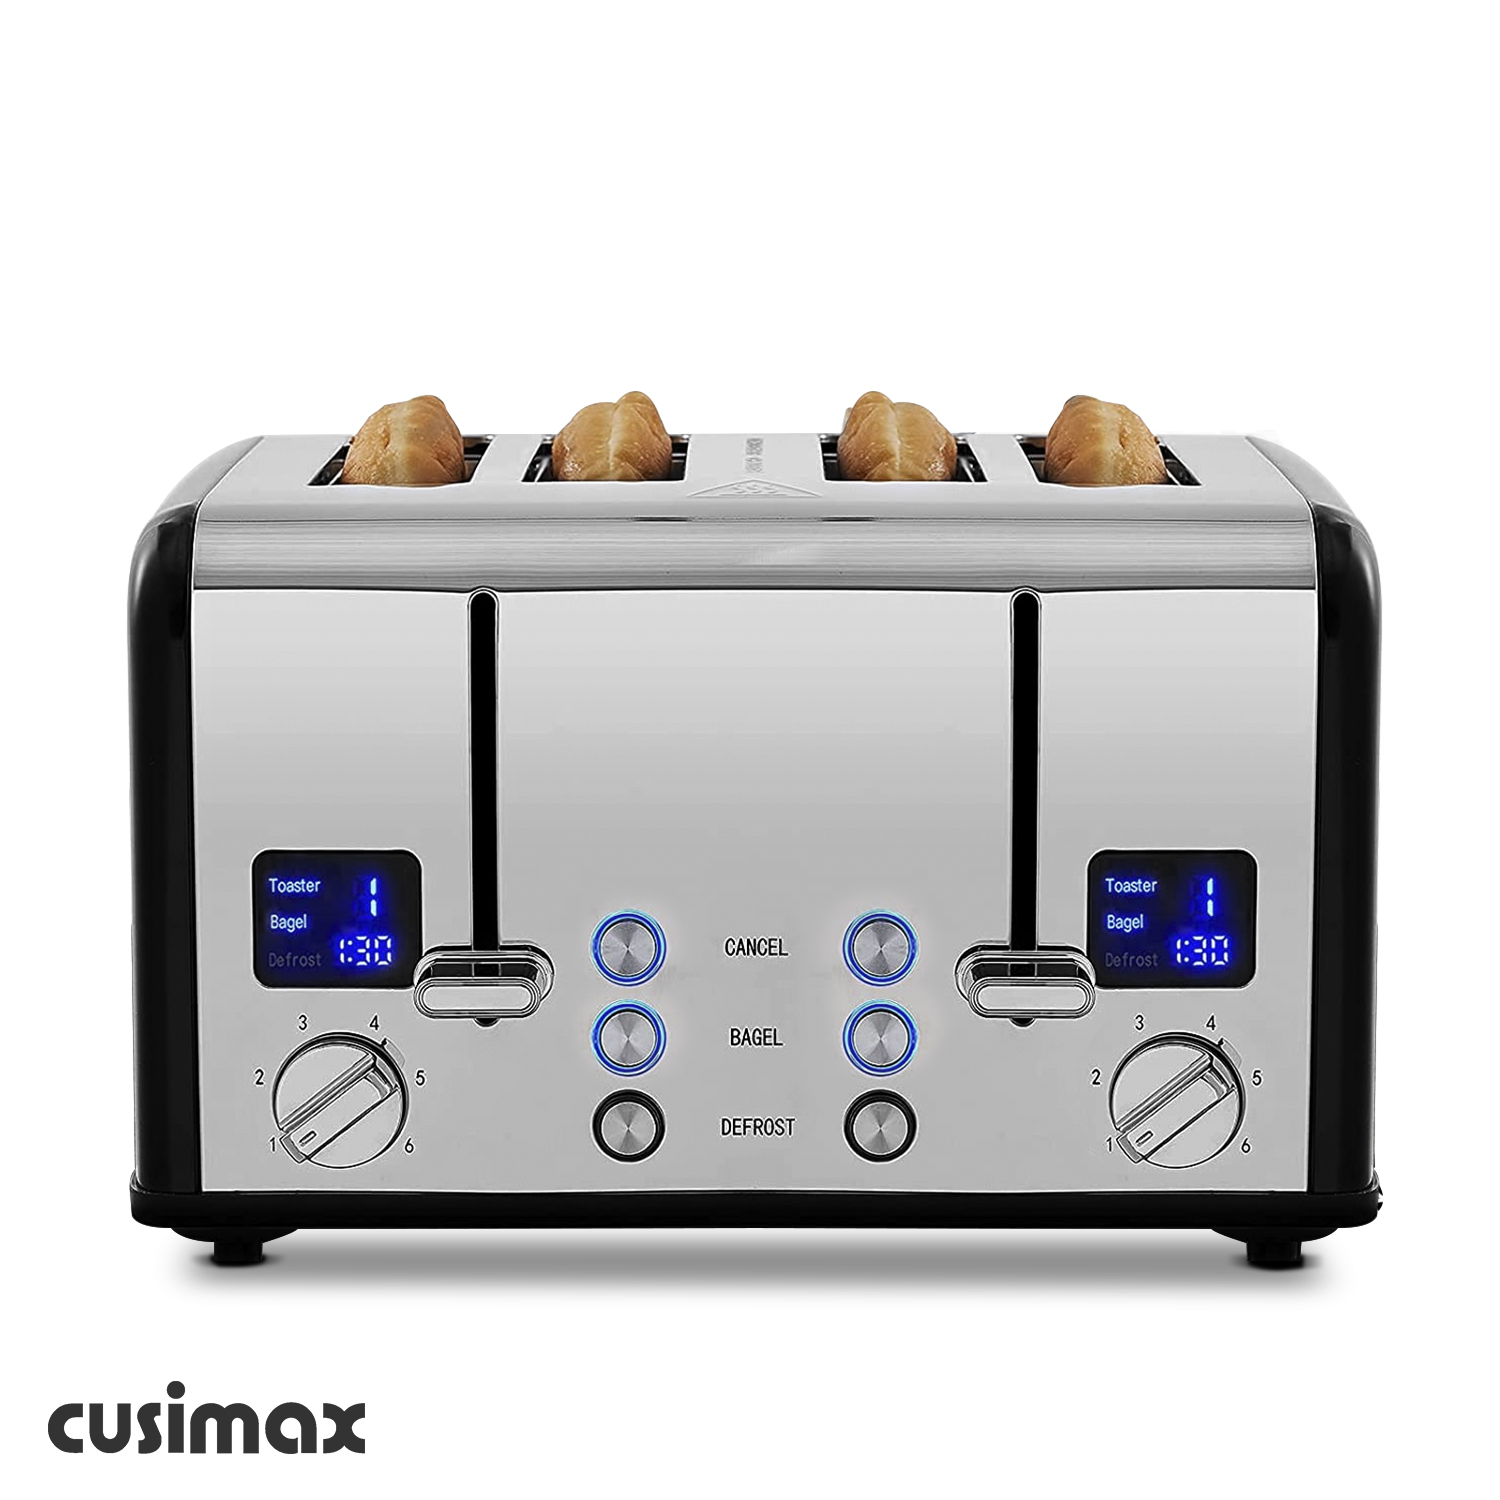 Toaster 4 Slice, Geek Chef Stainless Steel Extra-Wide Slot Toaster wit